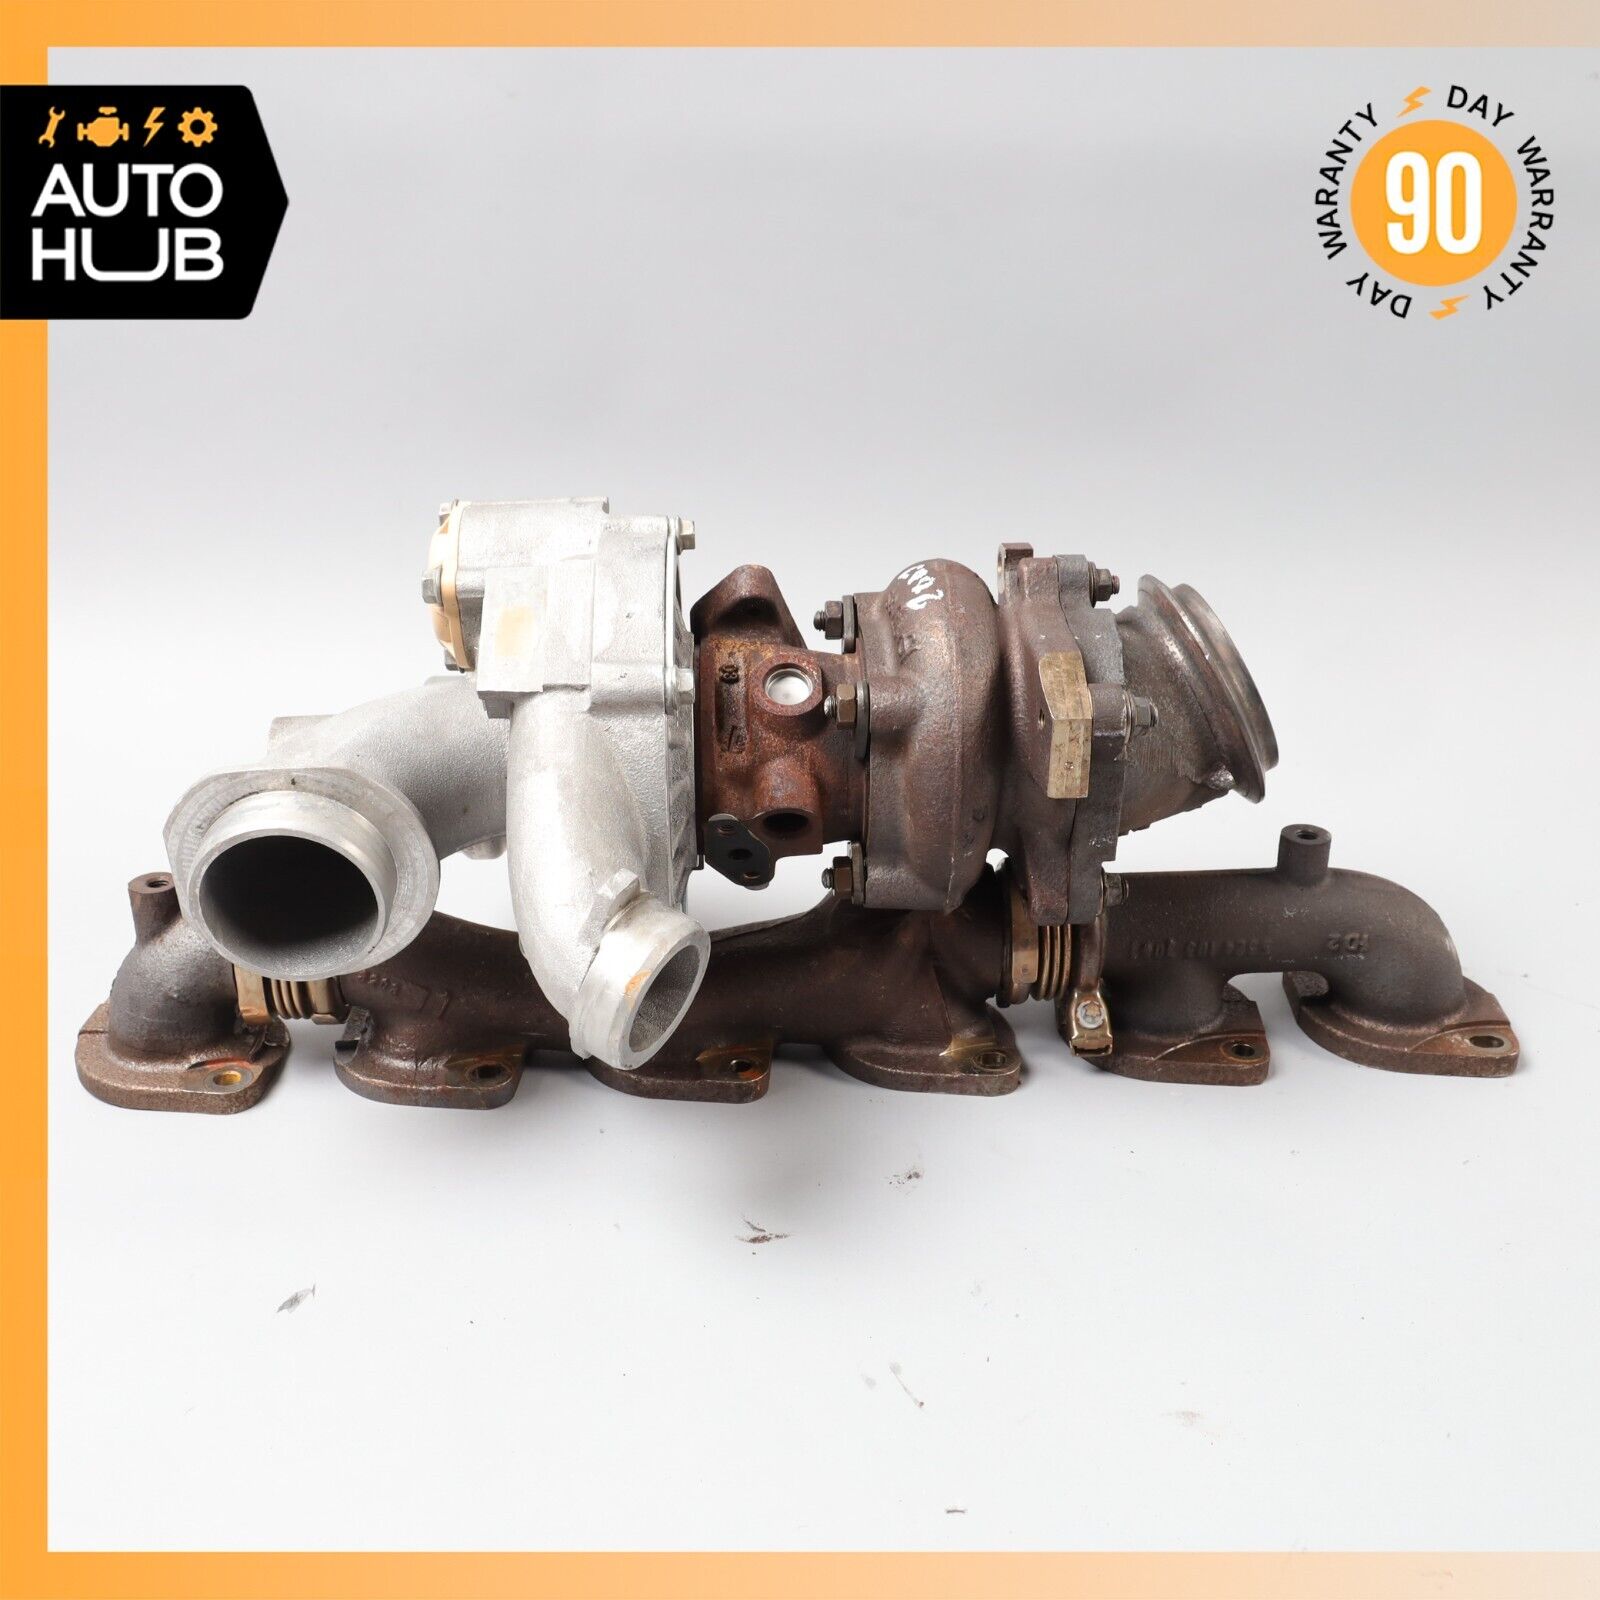 03-14 Mercedes W221 S600 CL600 M275 Turbocharger Turbo Manifold Right Side OEM